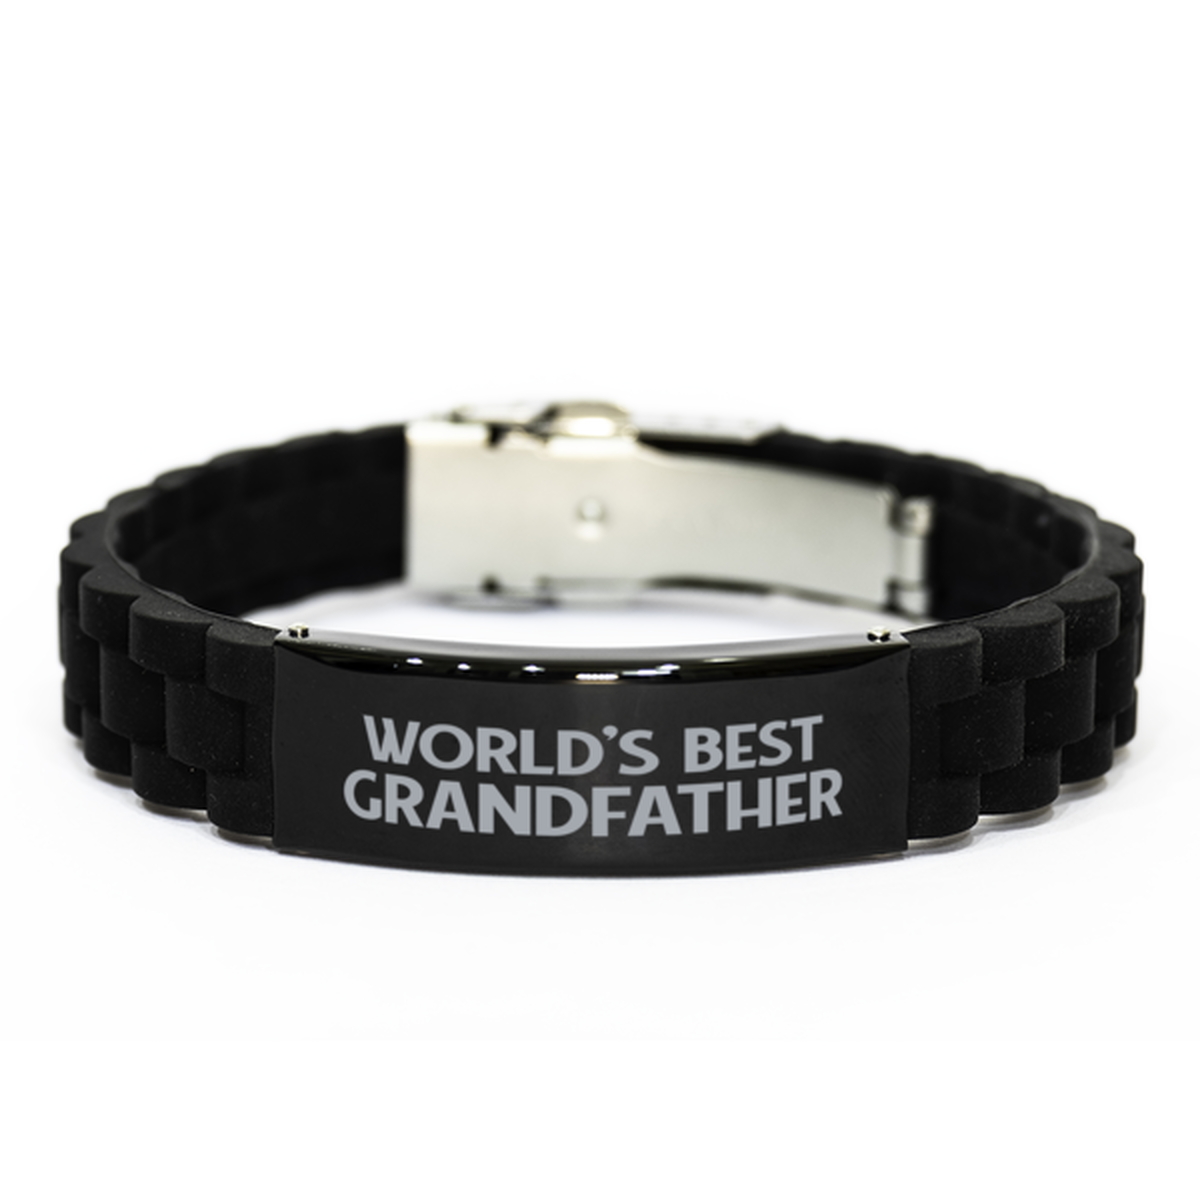 World's Best Grandfather Gifts, Funny Black Engraved Bracelet For Grandfather, Family Gifts For Men